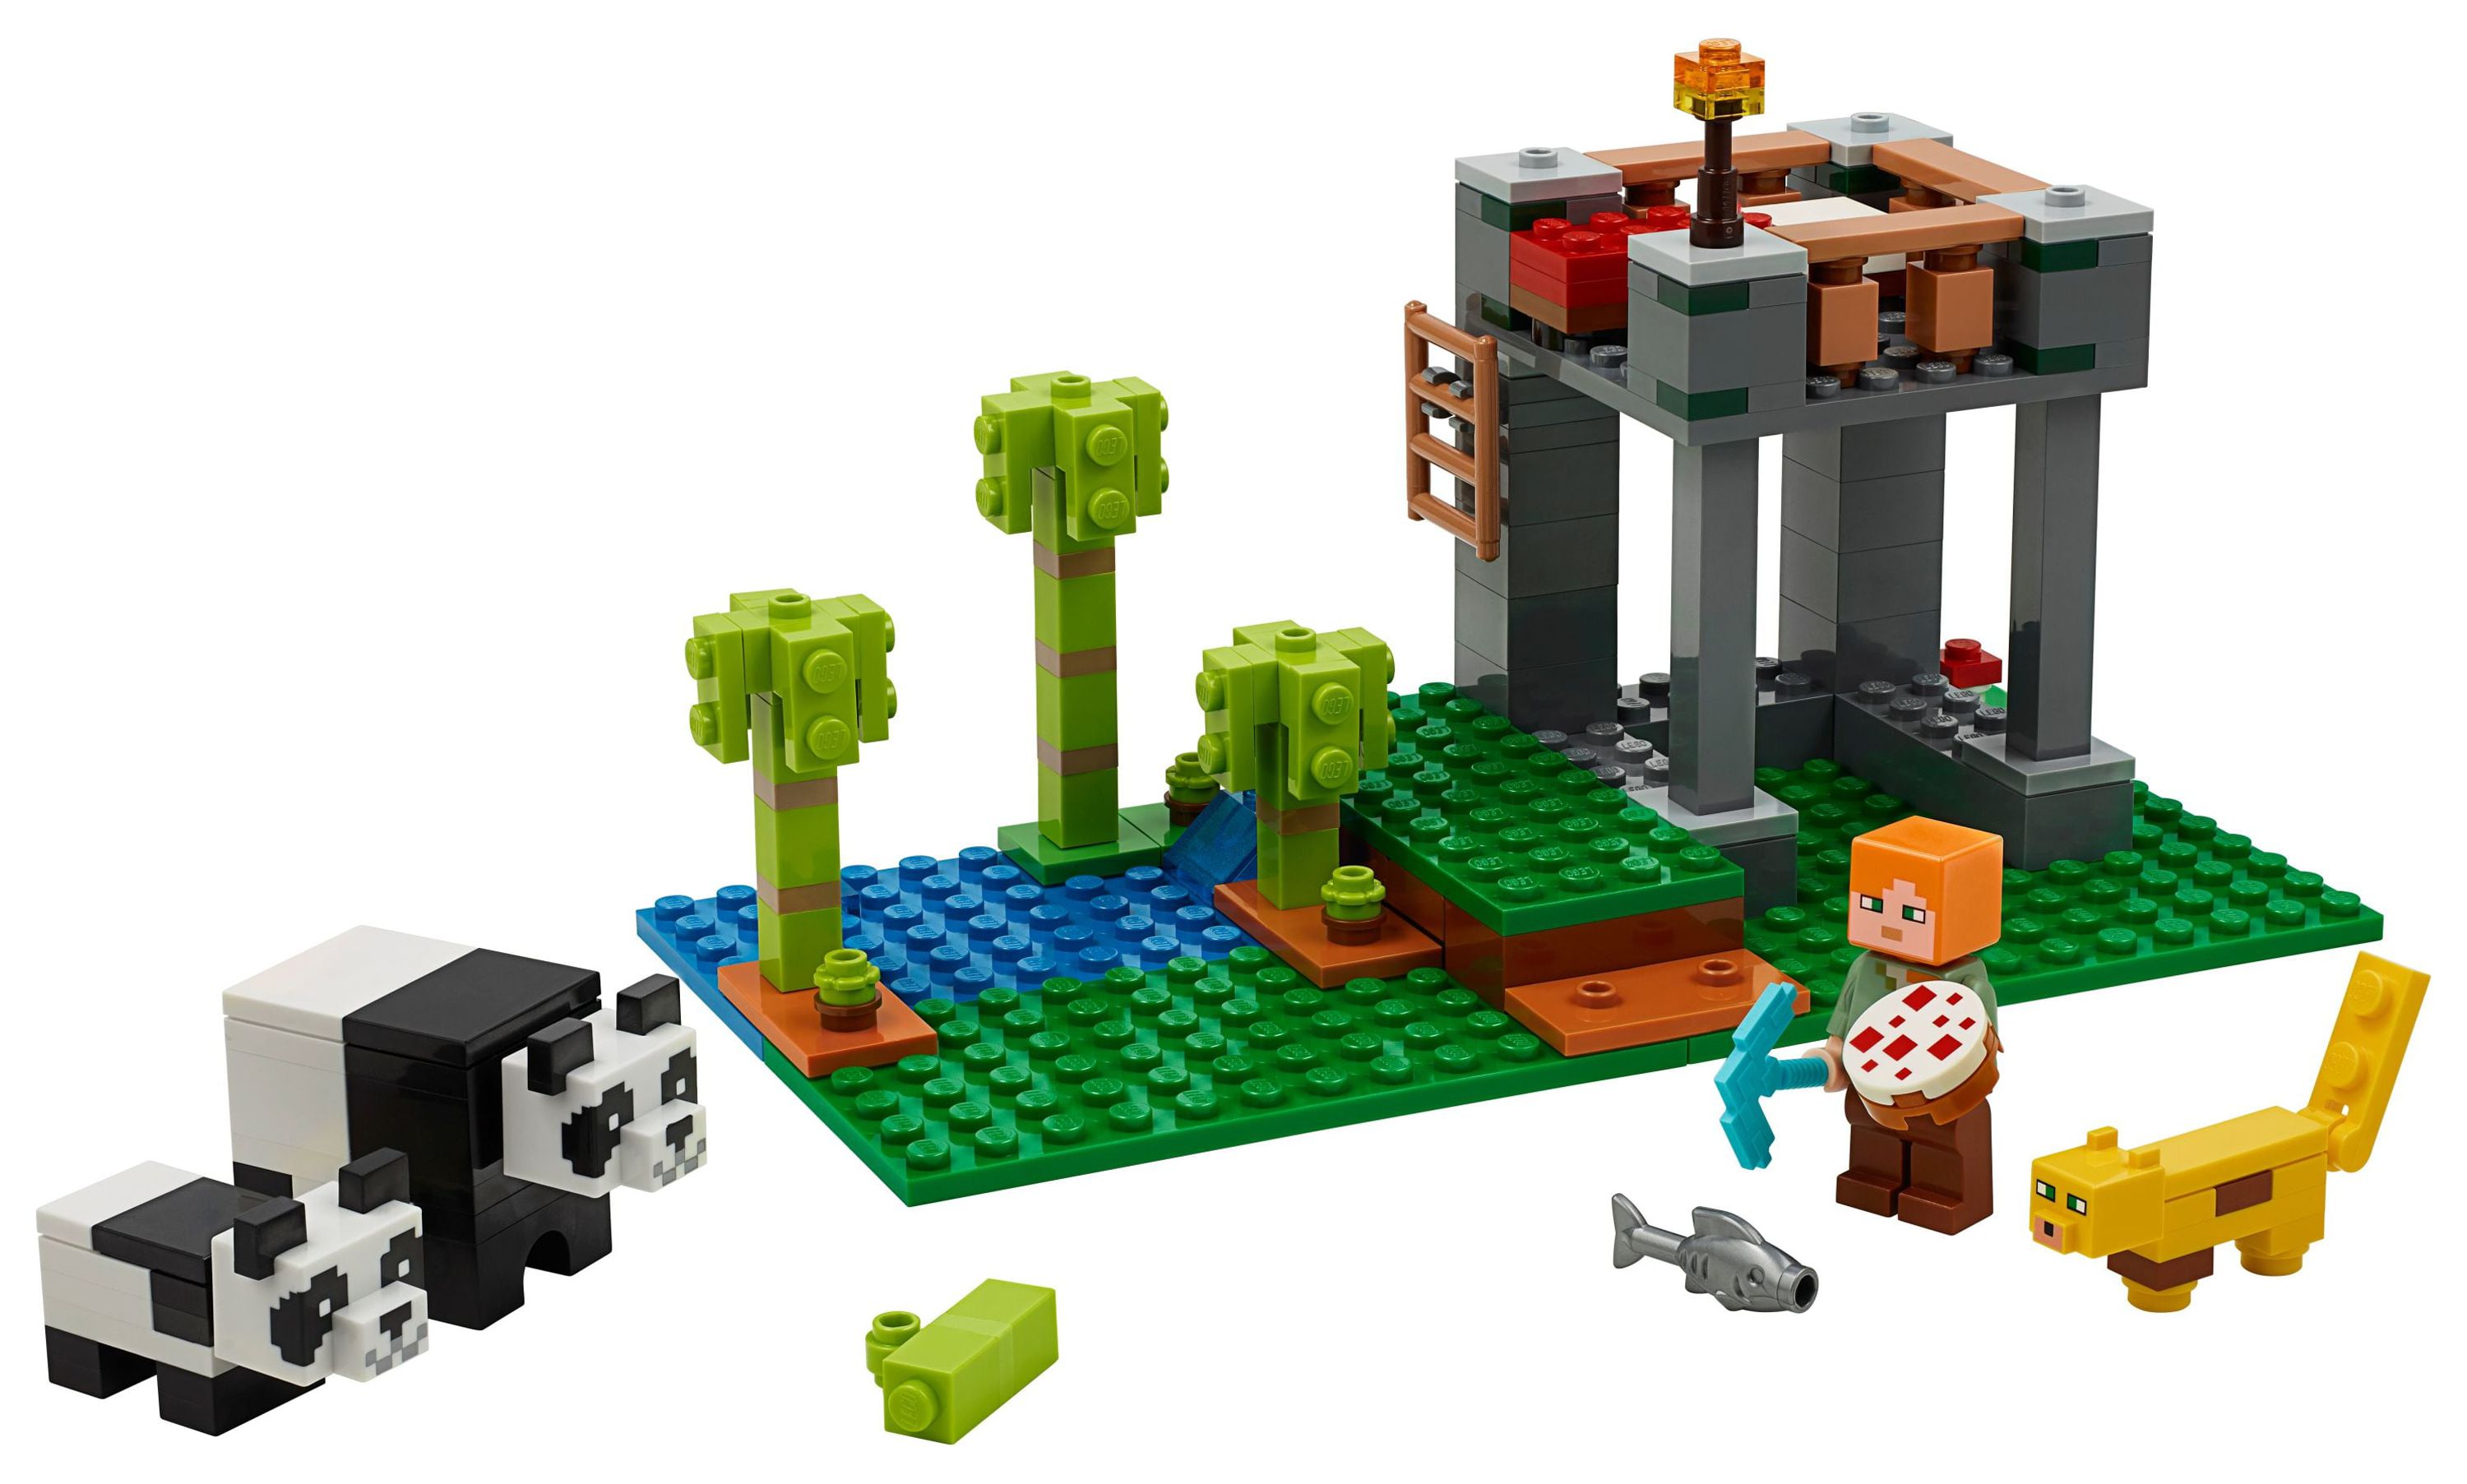 LEGO Minecraft The Panda Nursery 21158 Construction Toy for Kids, Great Creative Gift for Fans of Minecraft (204 Pieces) - image 3 of 7